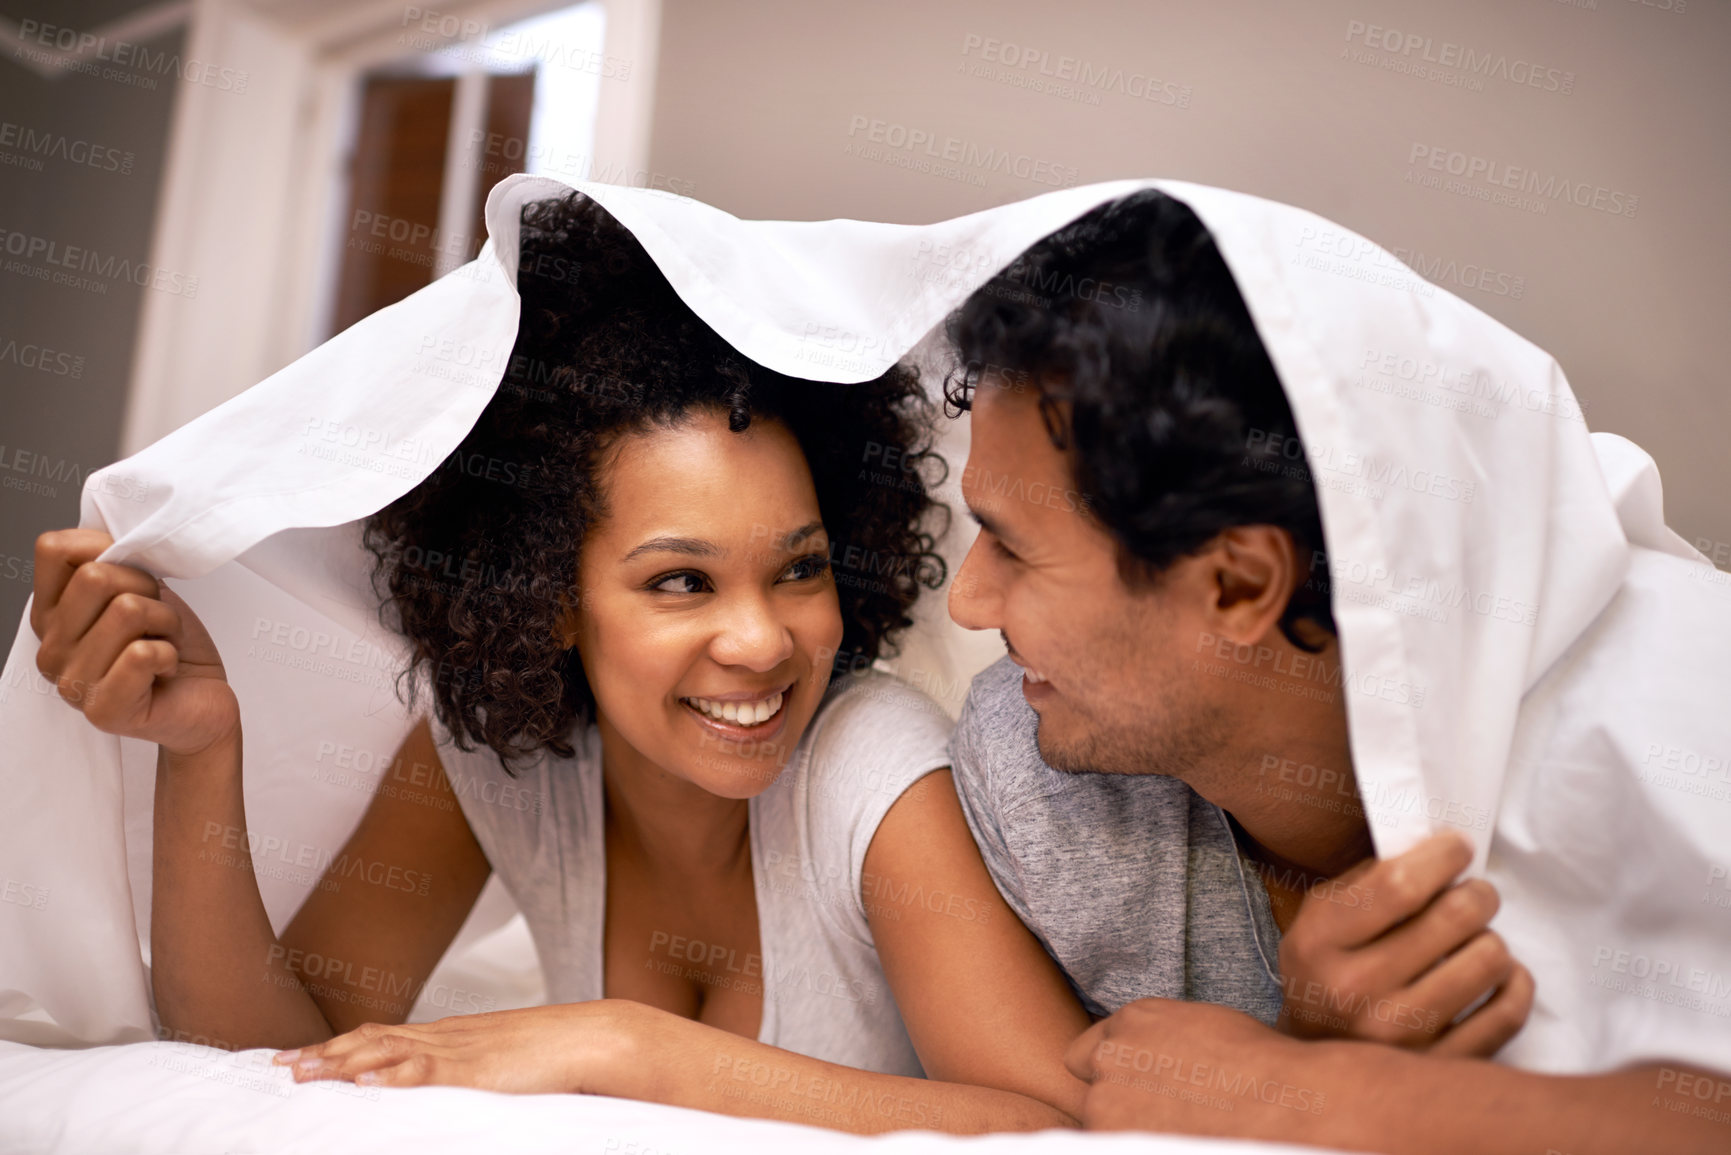 Buy stock photo A cute couple underneath the covers